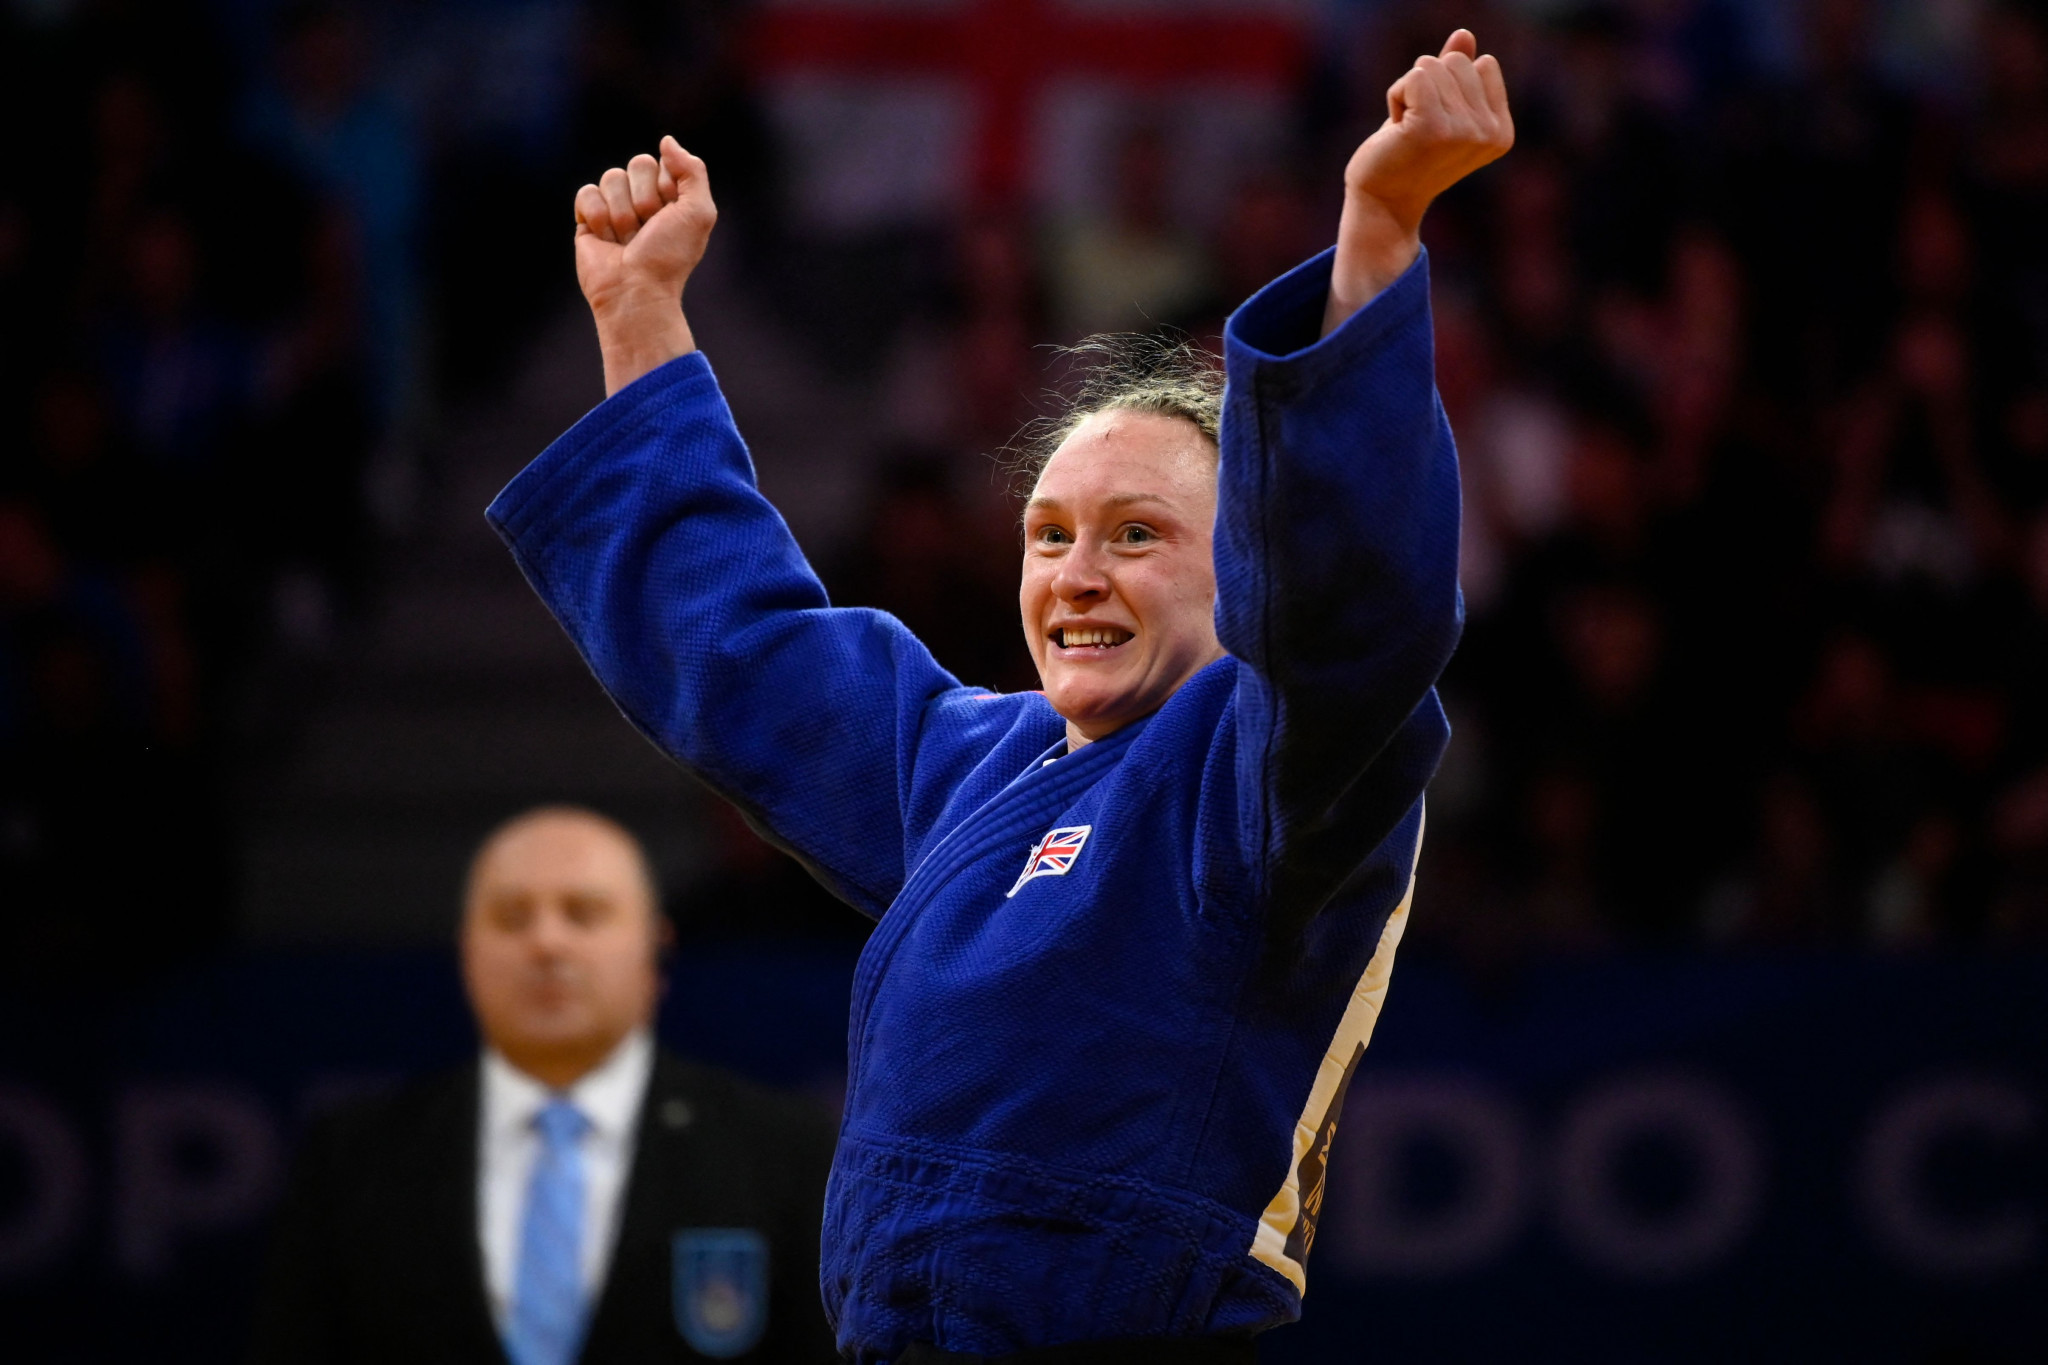 Gemma Howell achieved a series of tough victories en route to gold at the European Judo Championships ©Getty Images